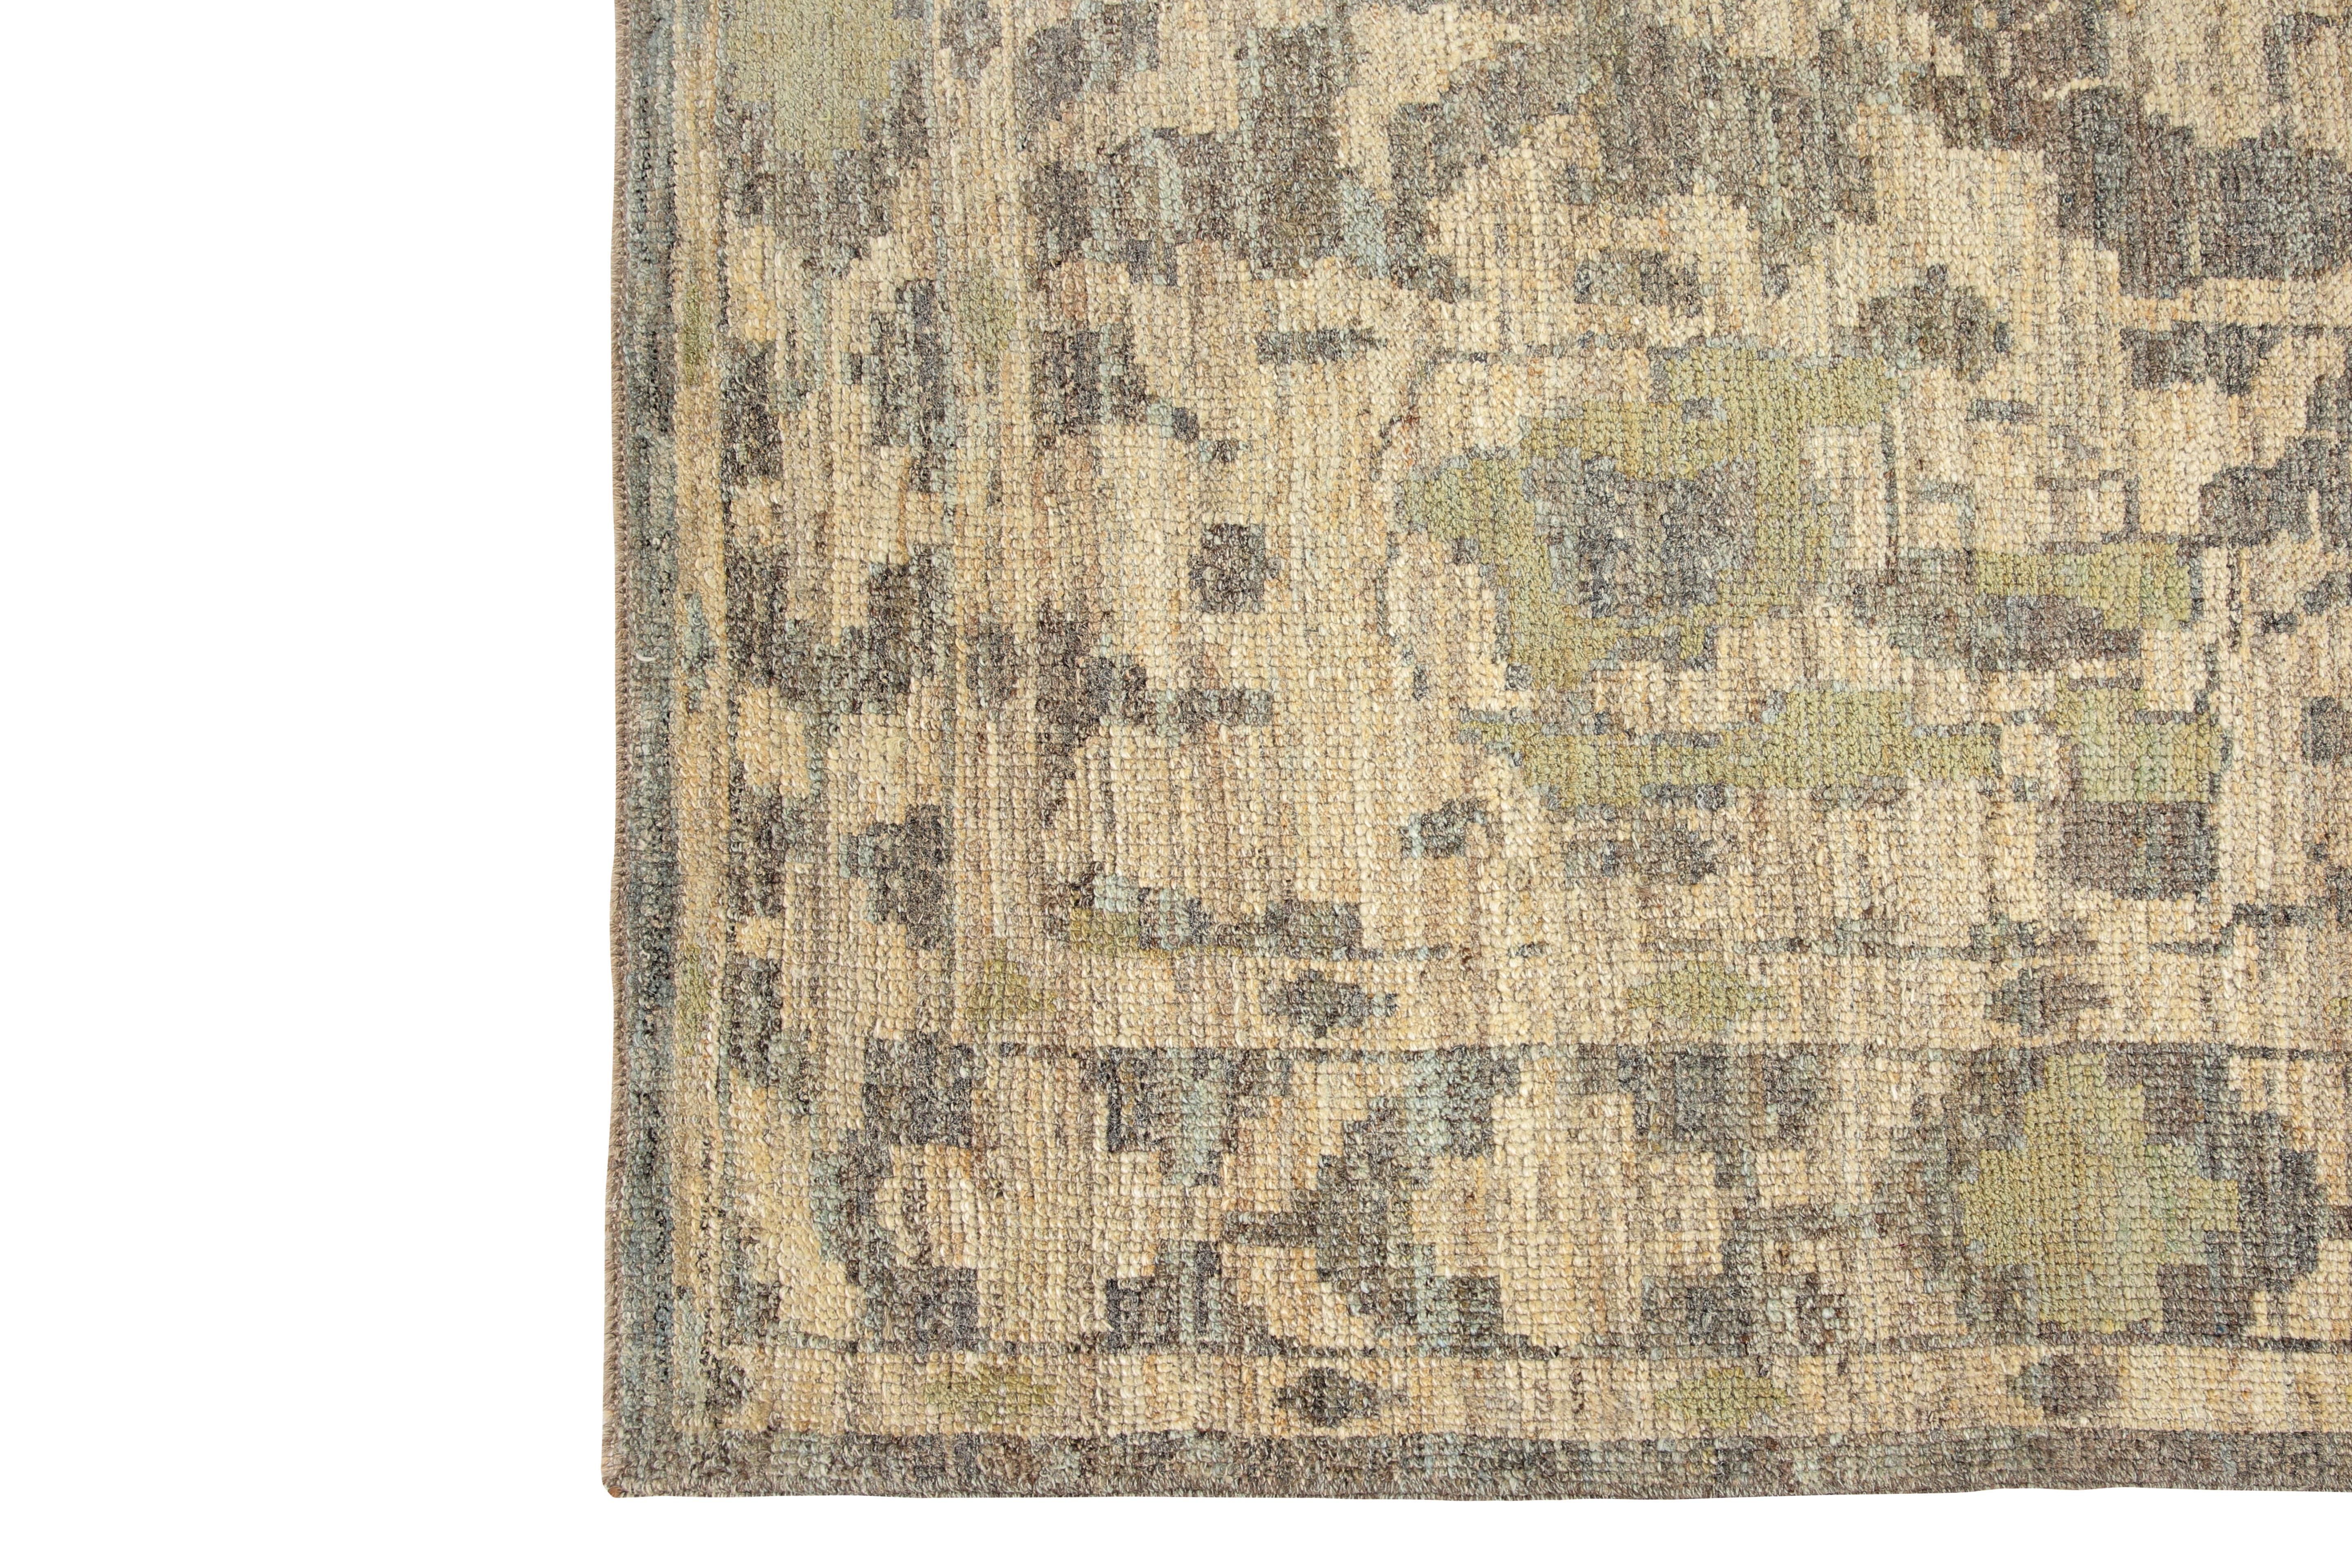 Introducing our exquisite handmade Oushak rug, originating from Turkey. This stunning rug boasts a light grey background with a beautifully blended beige border, adding a touch of elegance to any room. The modern design incorporates tones of green,